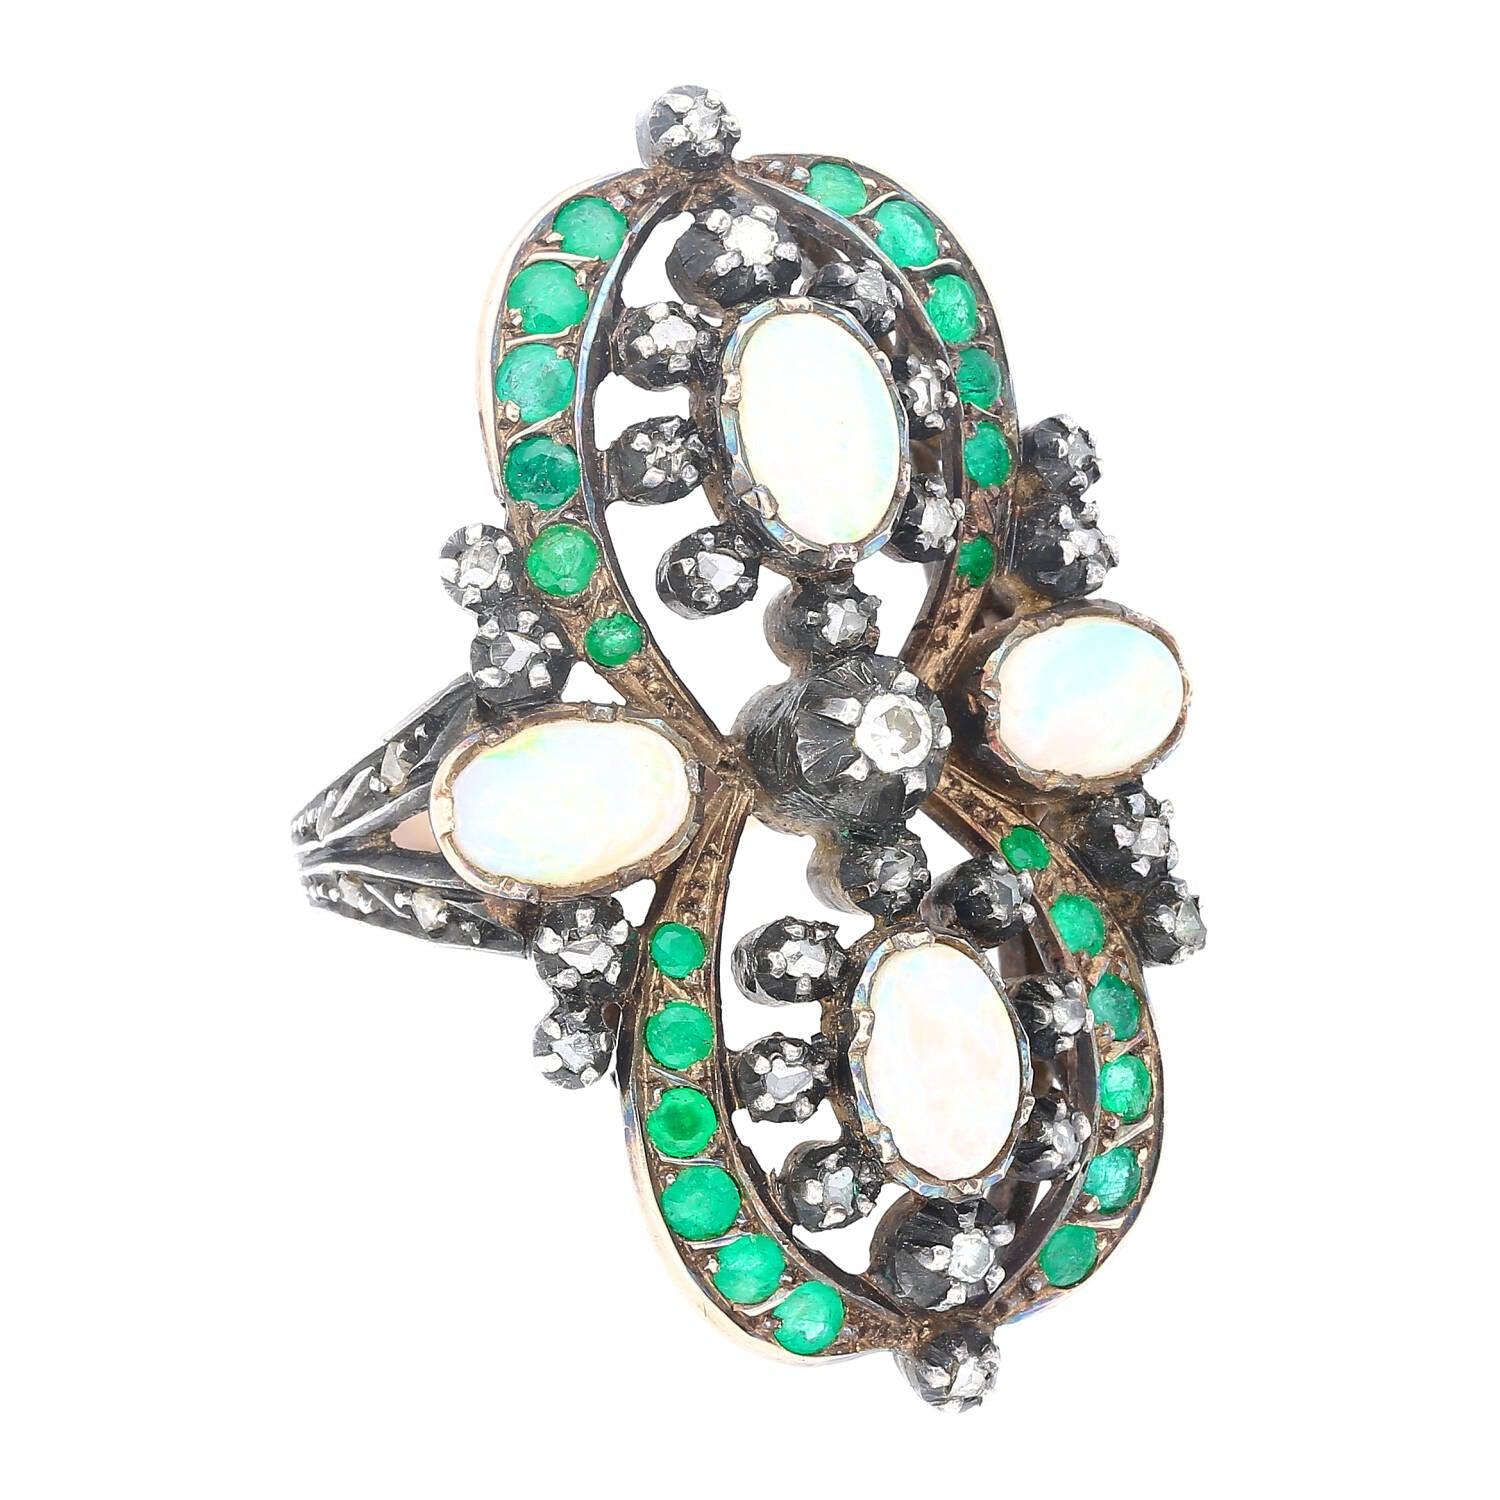 Antique Victorian Era 1800s Opal, Emerald, and Diamond Ring in Gold and Silver-Rings-ASSAY